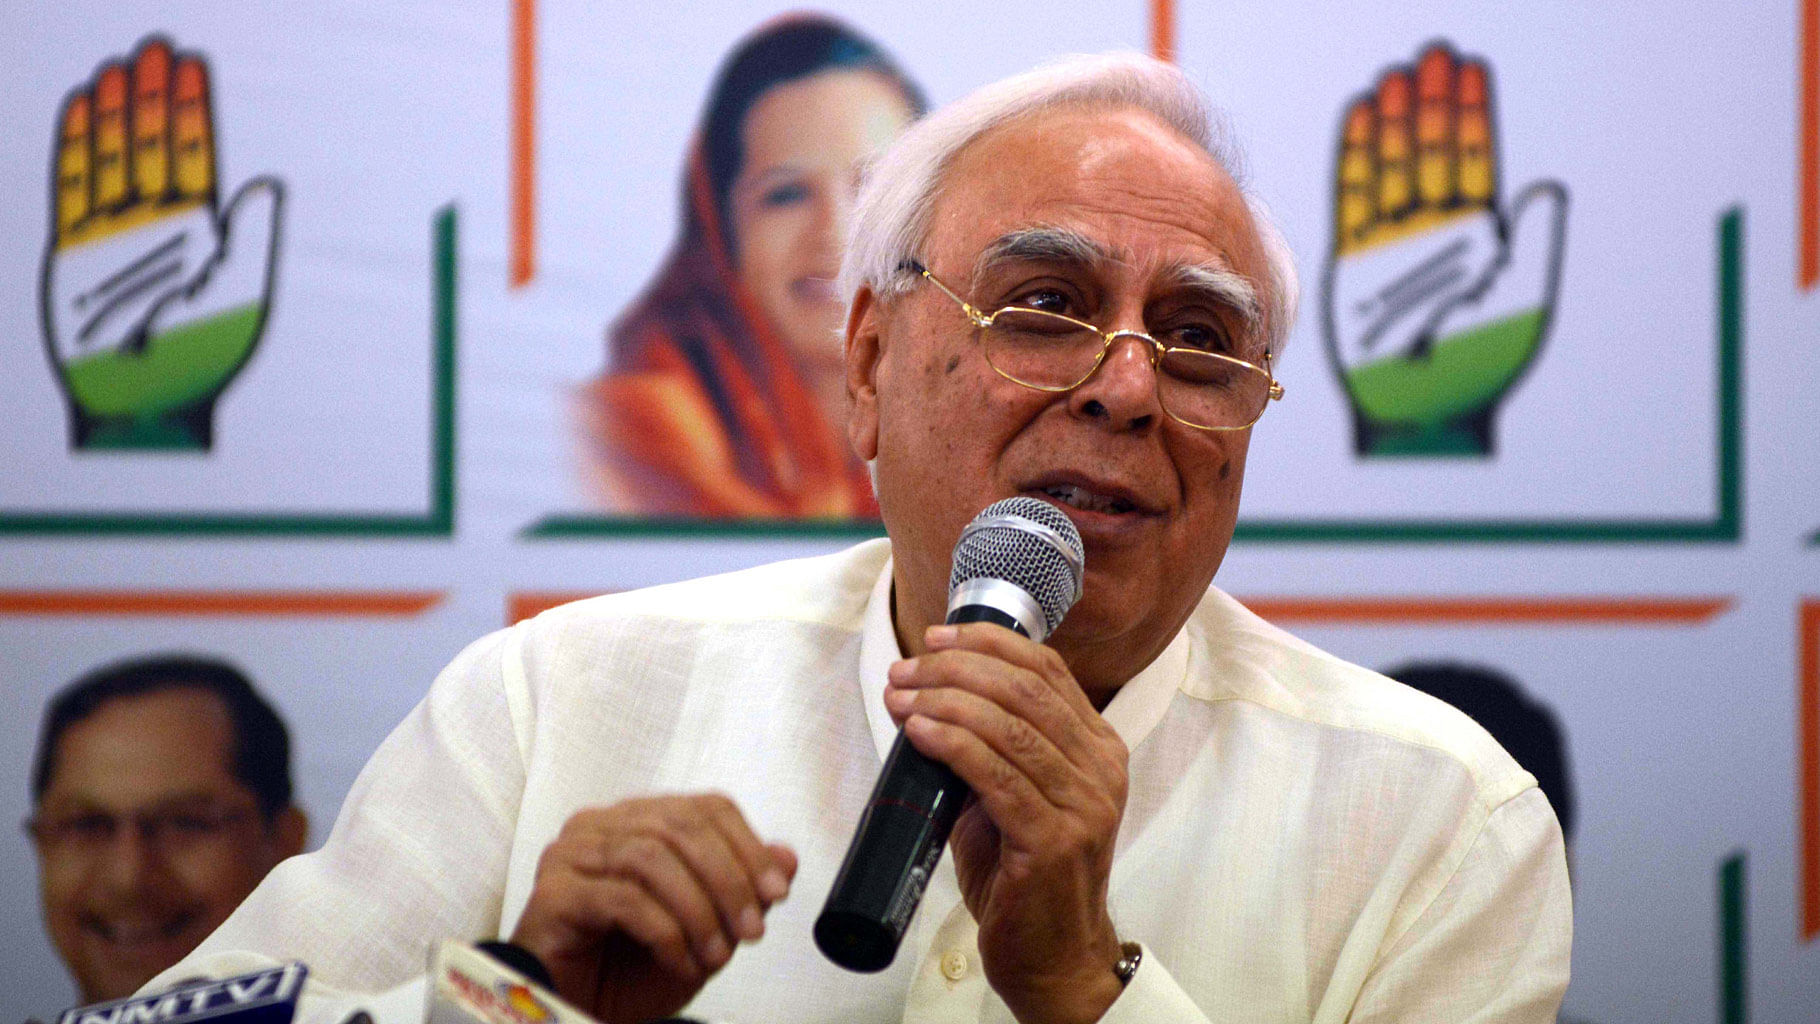 During the 5 December hearing in the Supreme Court, Kabil Sibal had suggested that the Ram Janmabhoomi-Babri Masjid case be deferred till after the 2019 Lok Sabha elections.